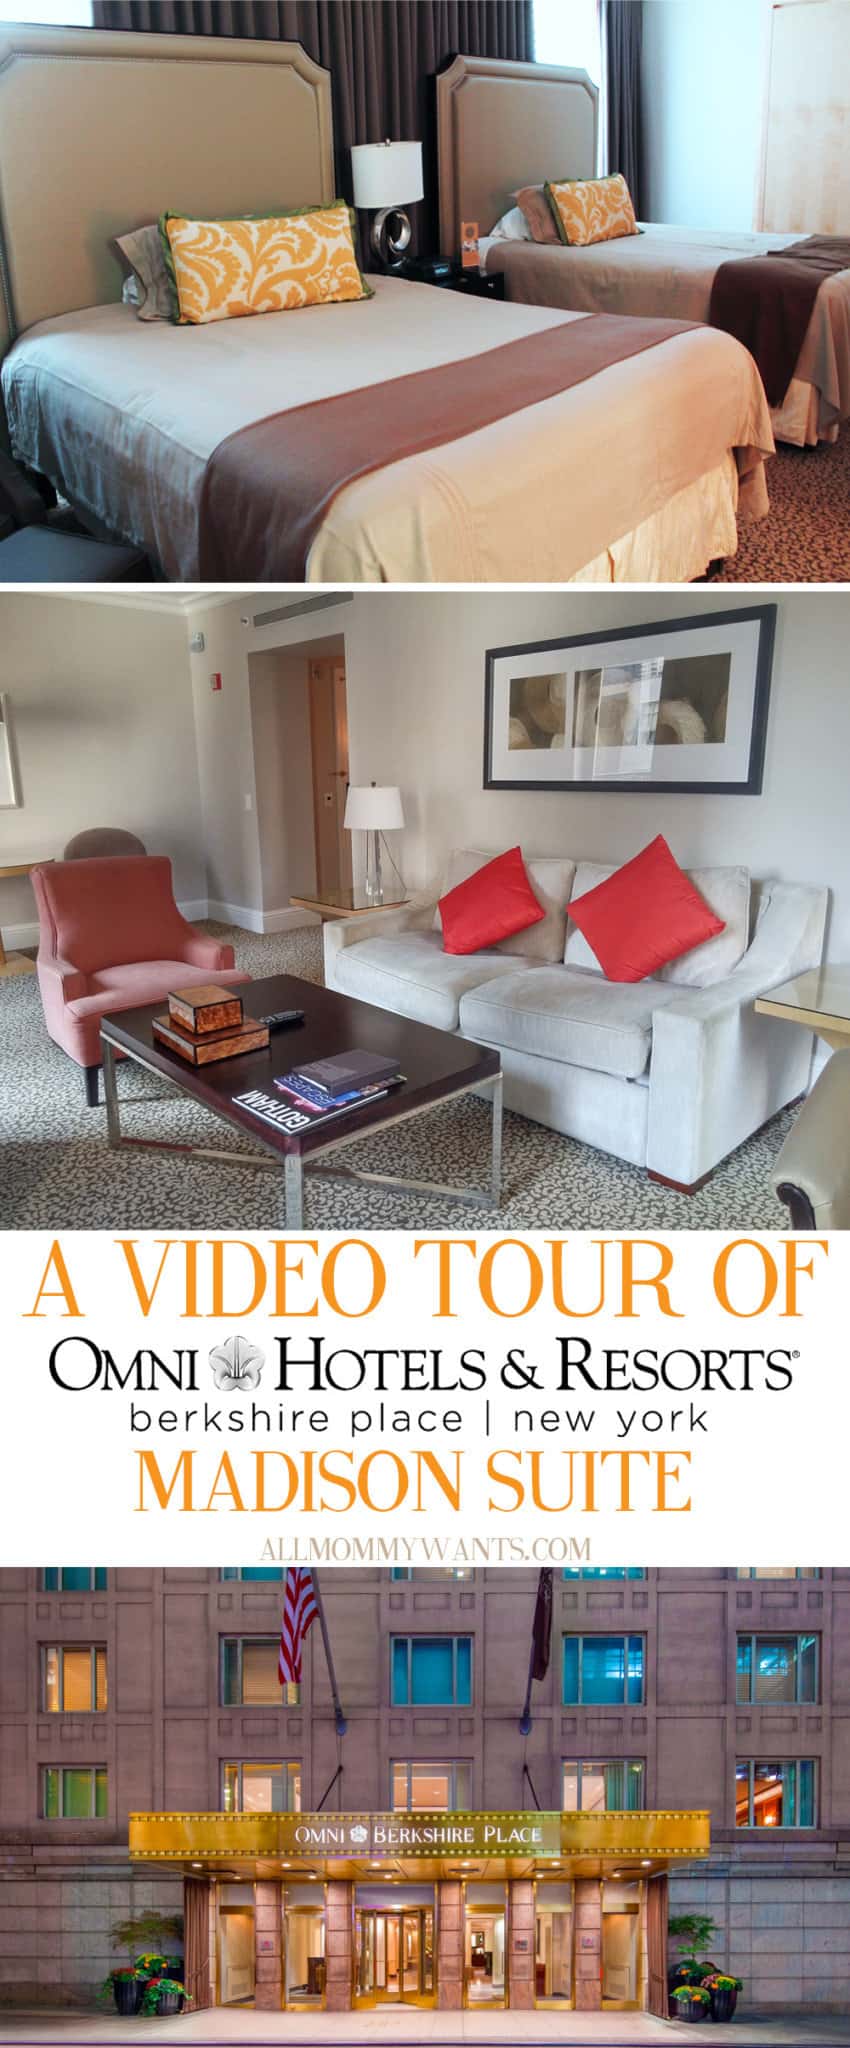 Luxury And Convenience At Omni Berkshire Nyc (a Video Tour)